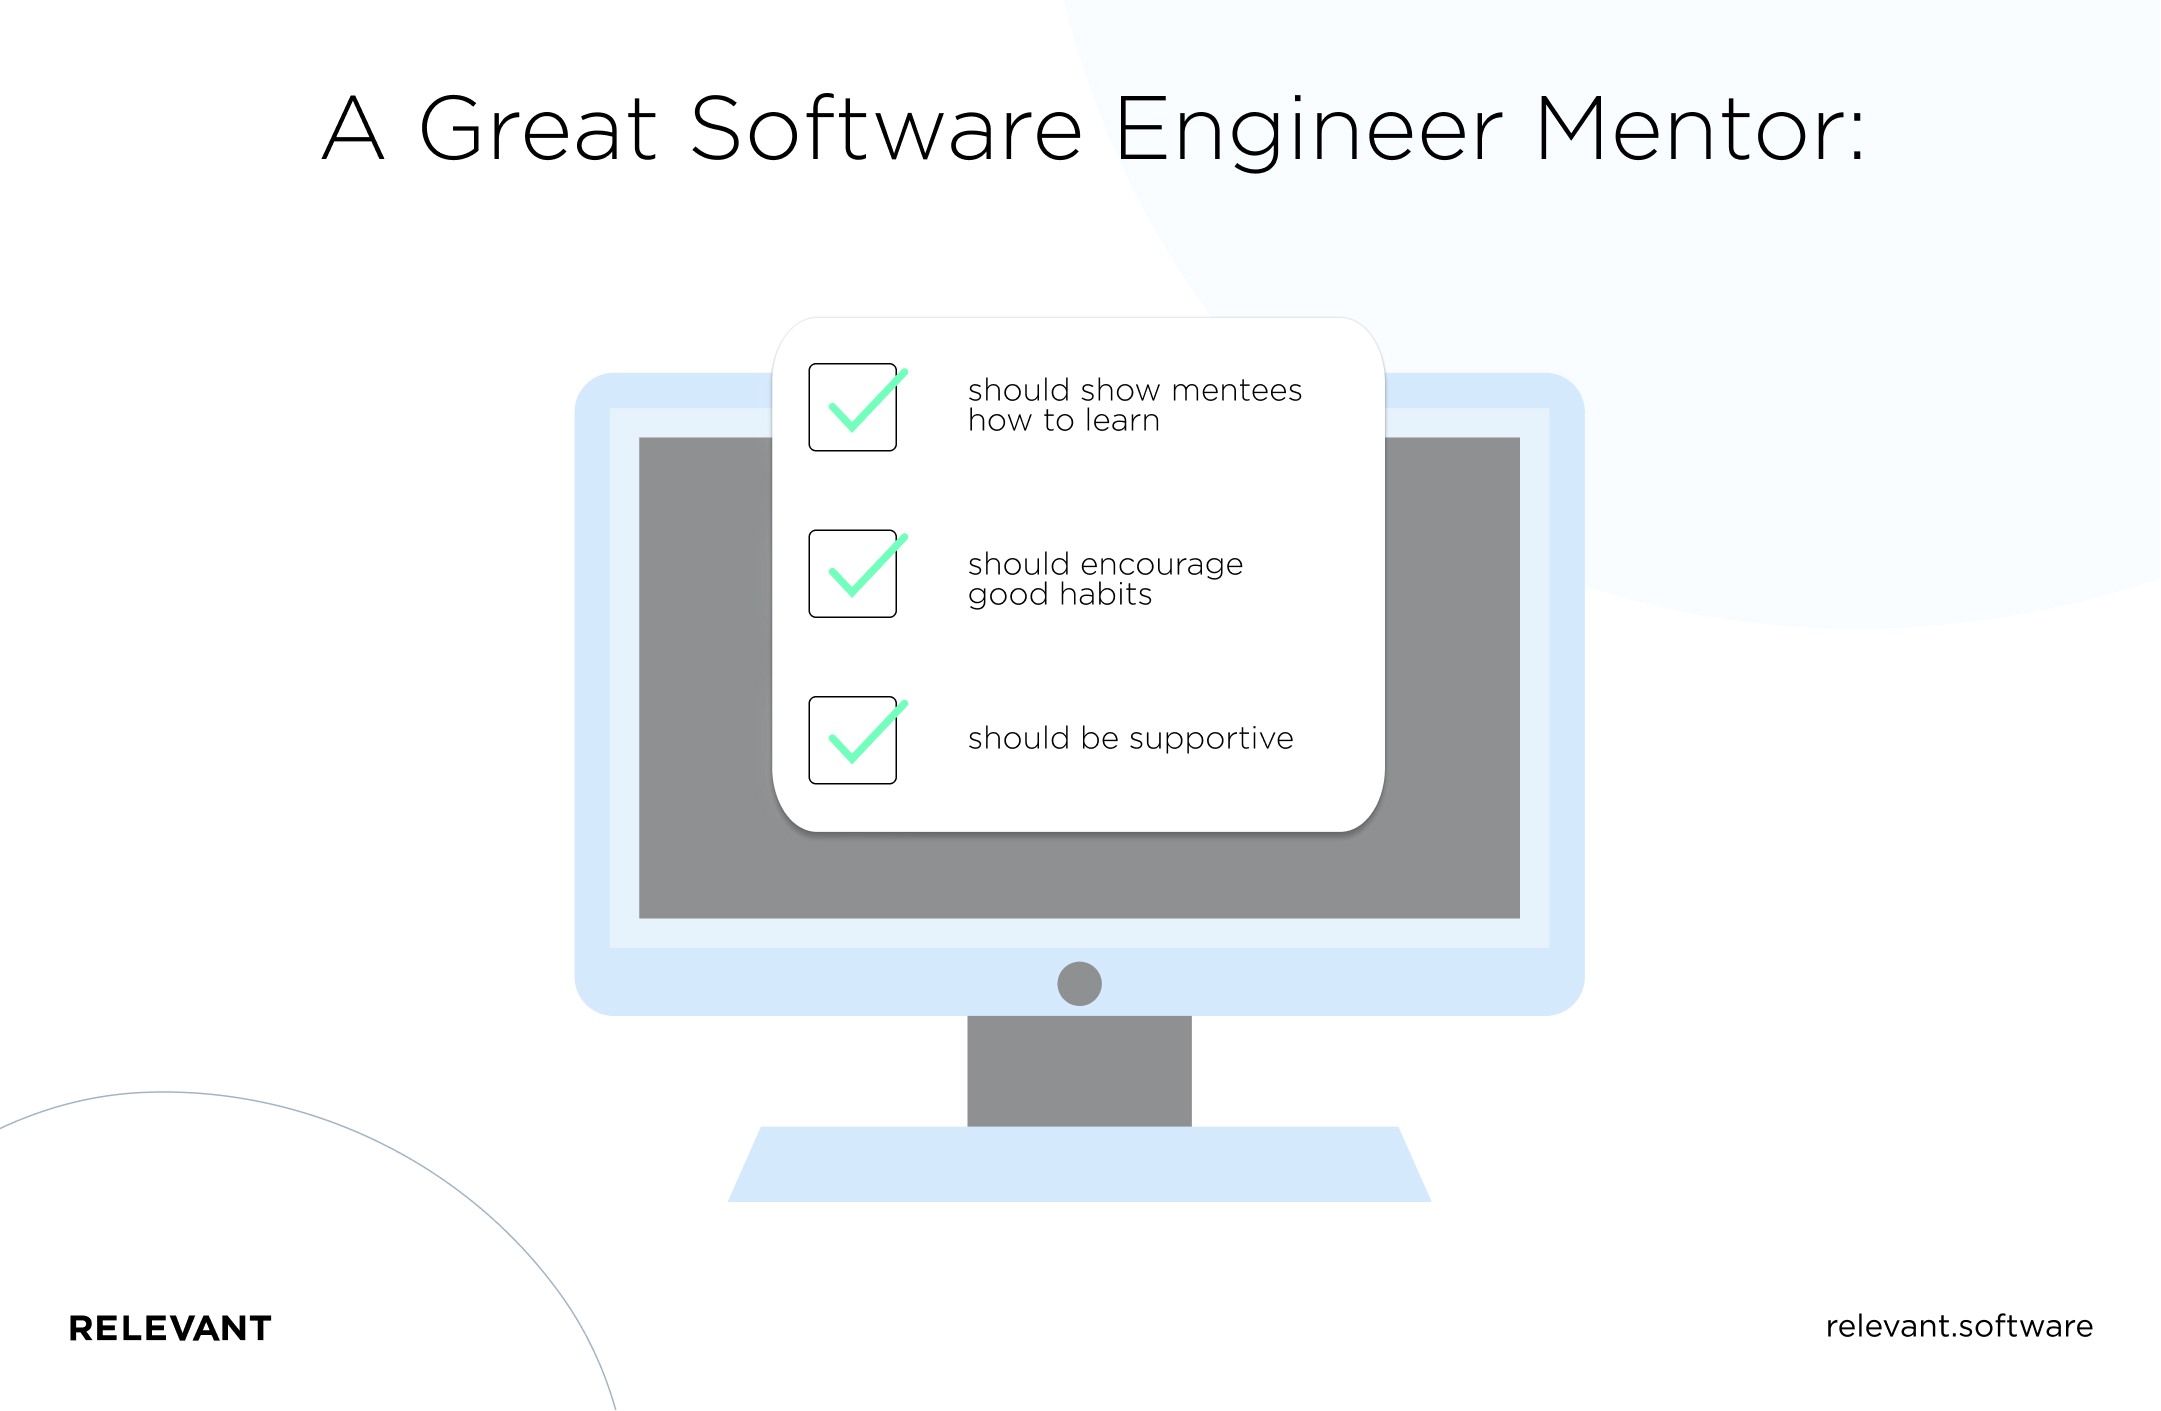 A Great Software Engineer Mentor:

should show mentees how to learn
should encourage good habits
should be supportive